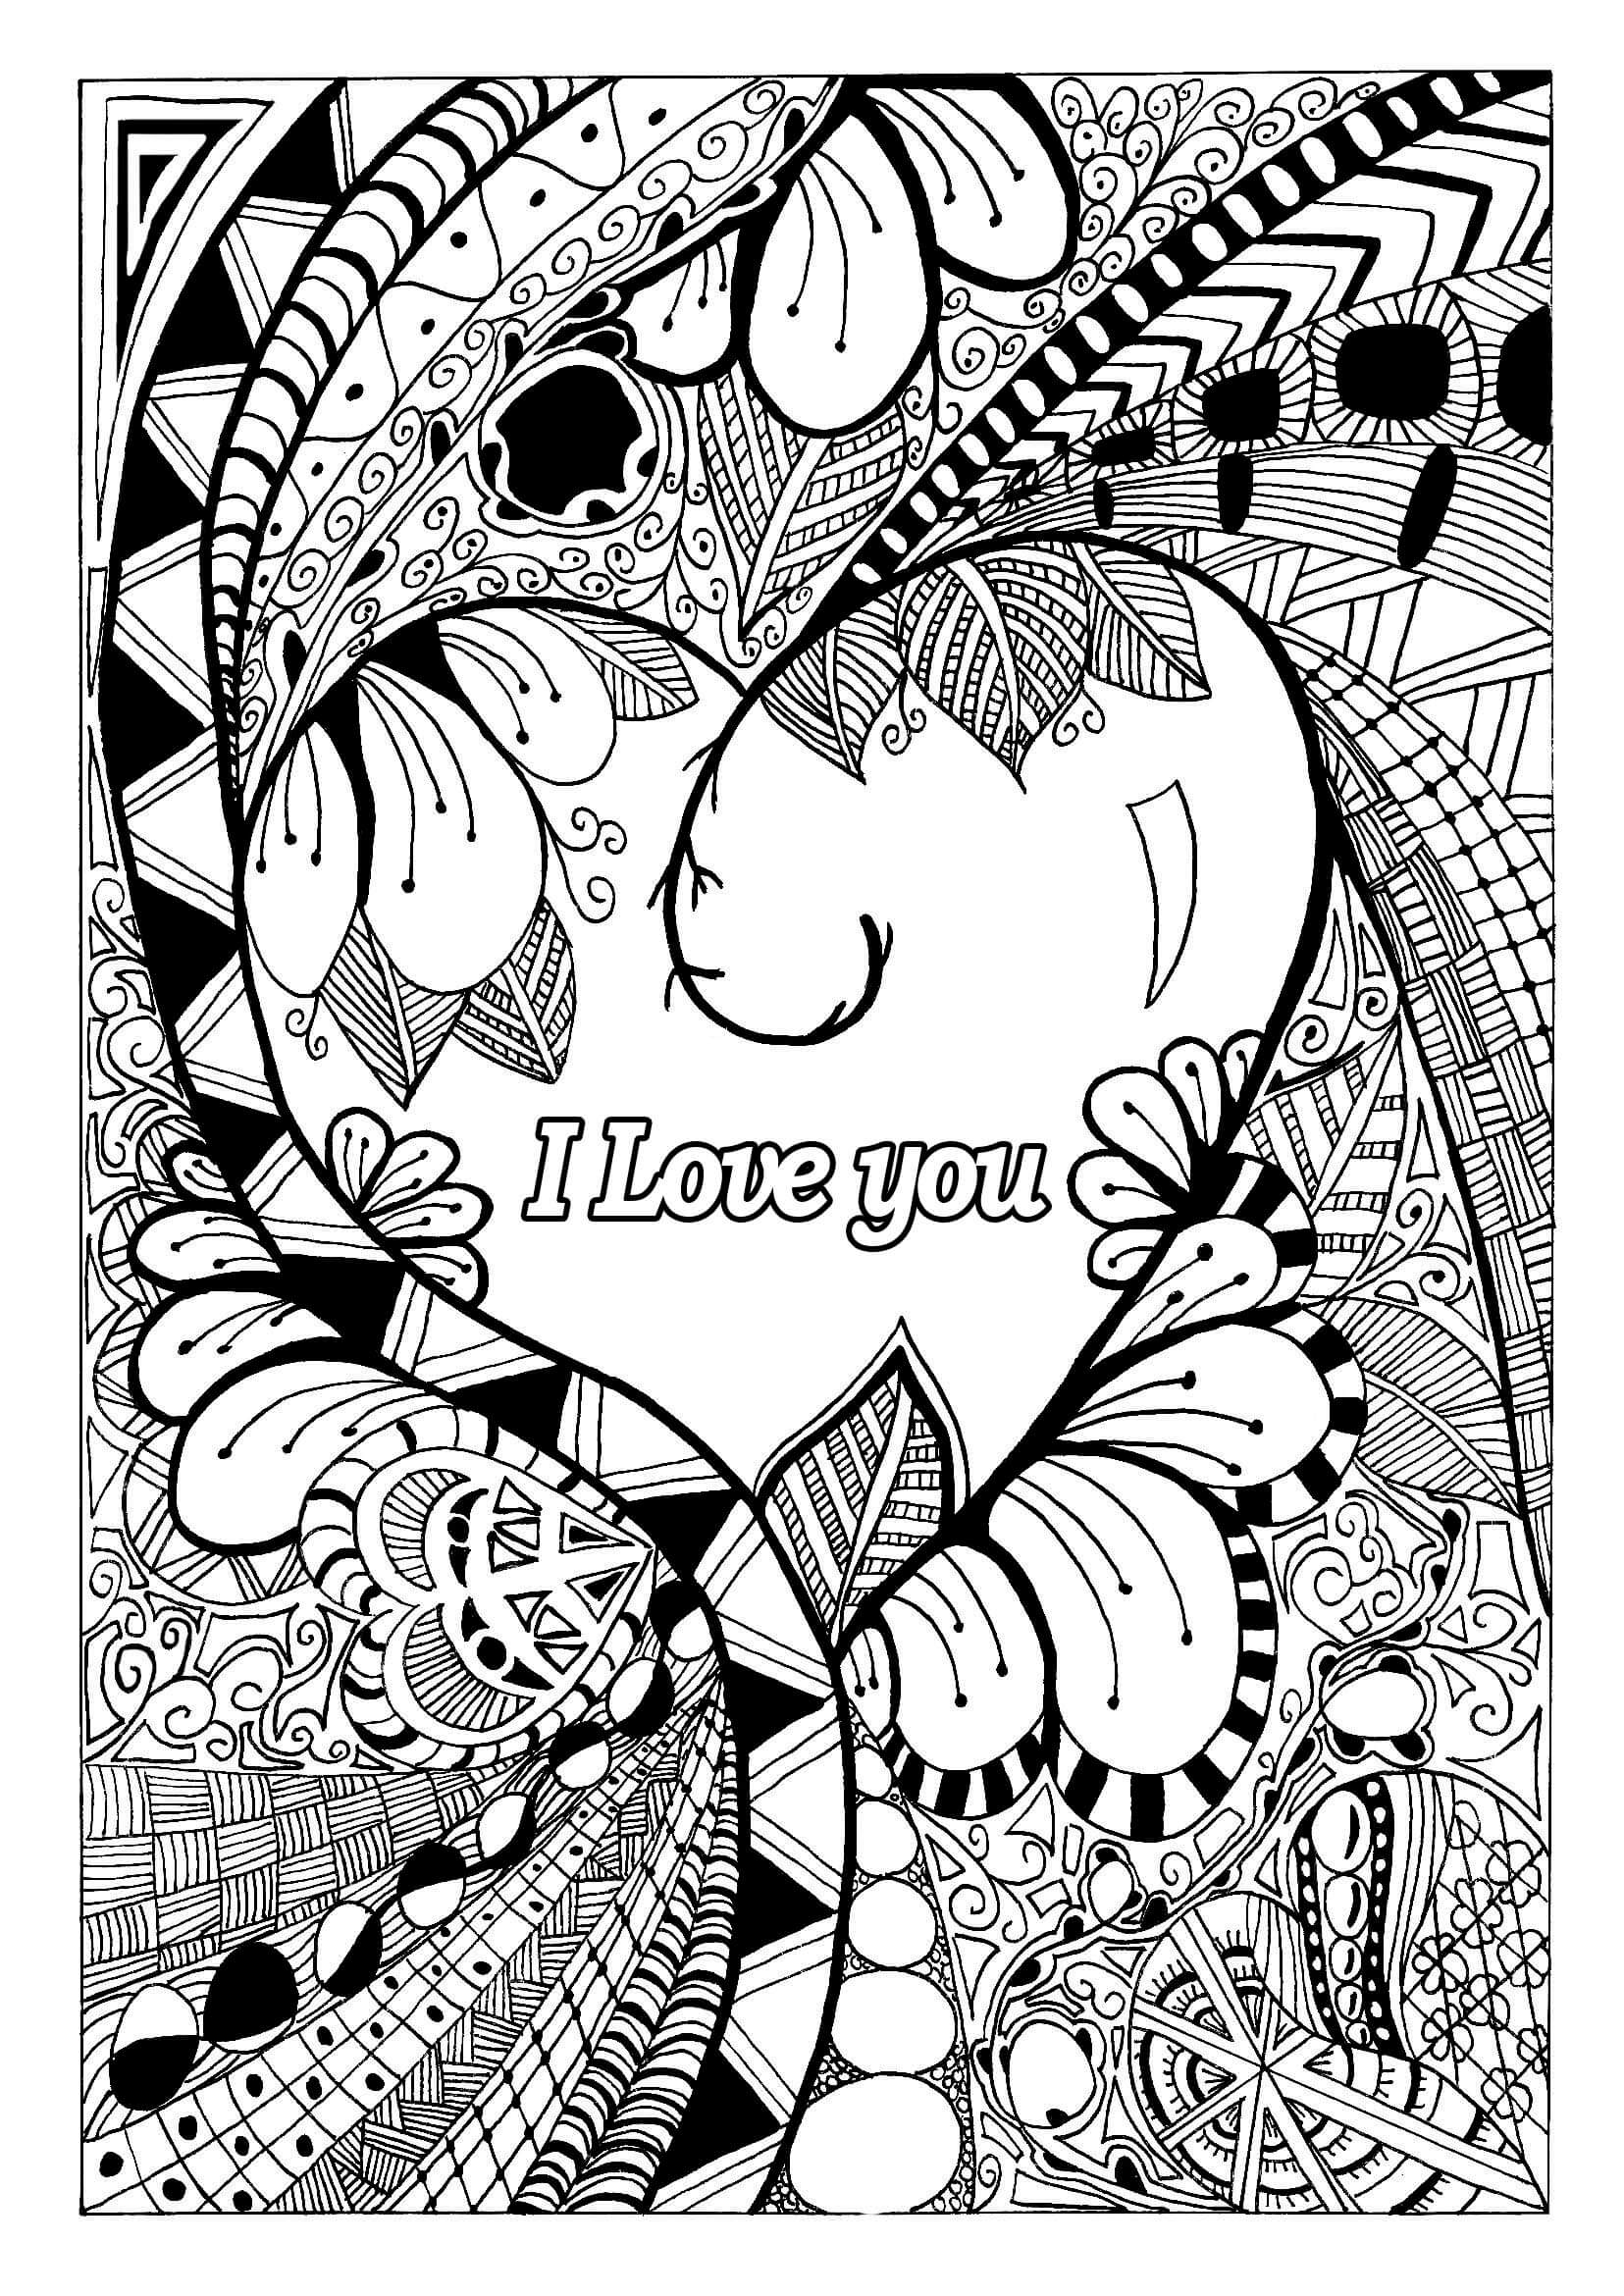 st patrick's day coloring pages | hallmark valentine coloring pages | heart coloring pages